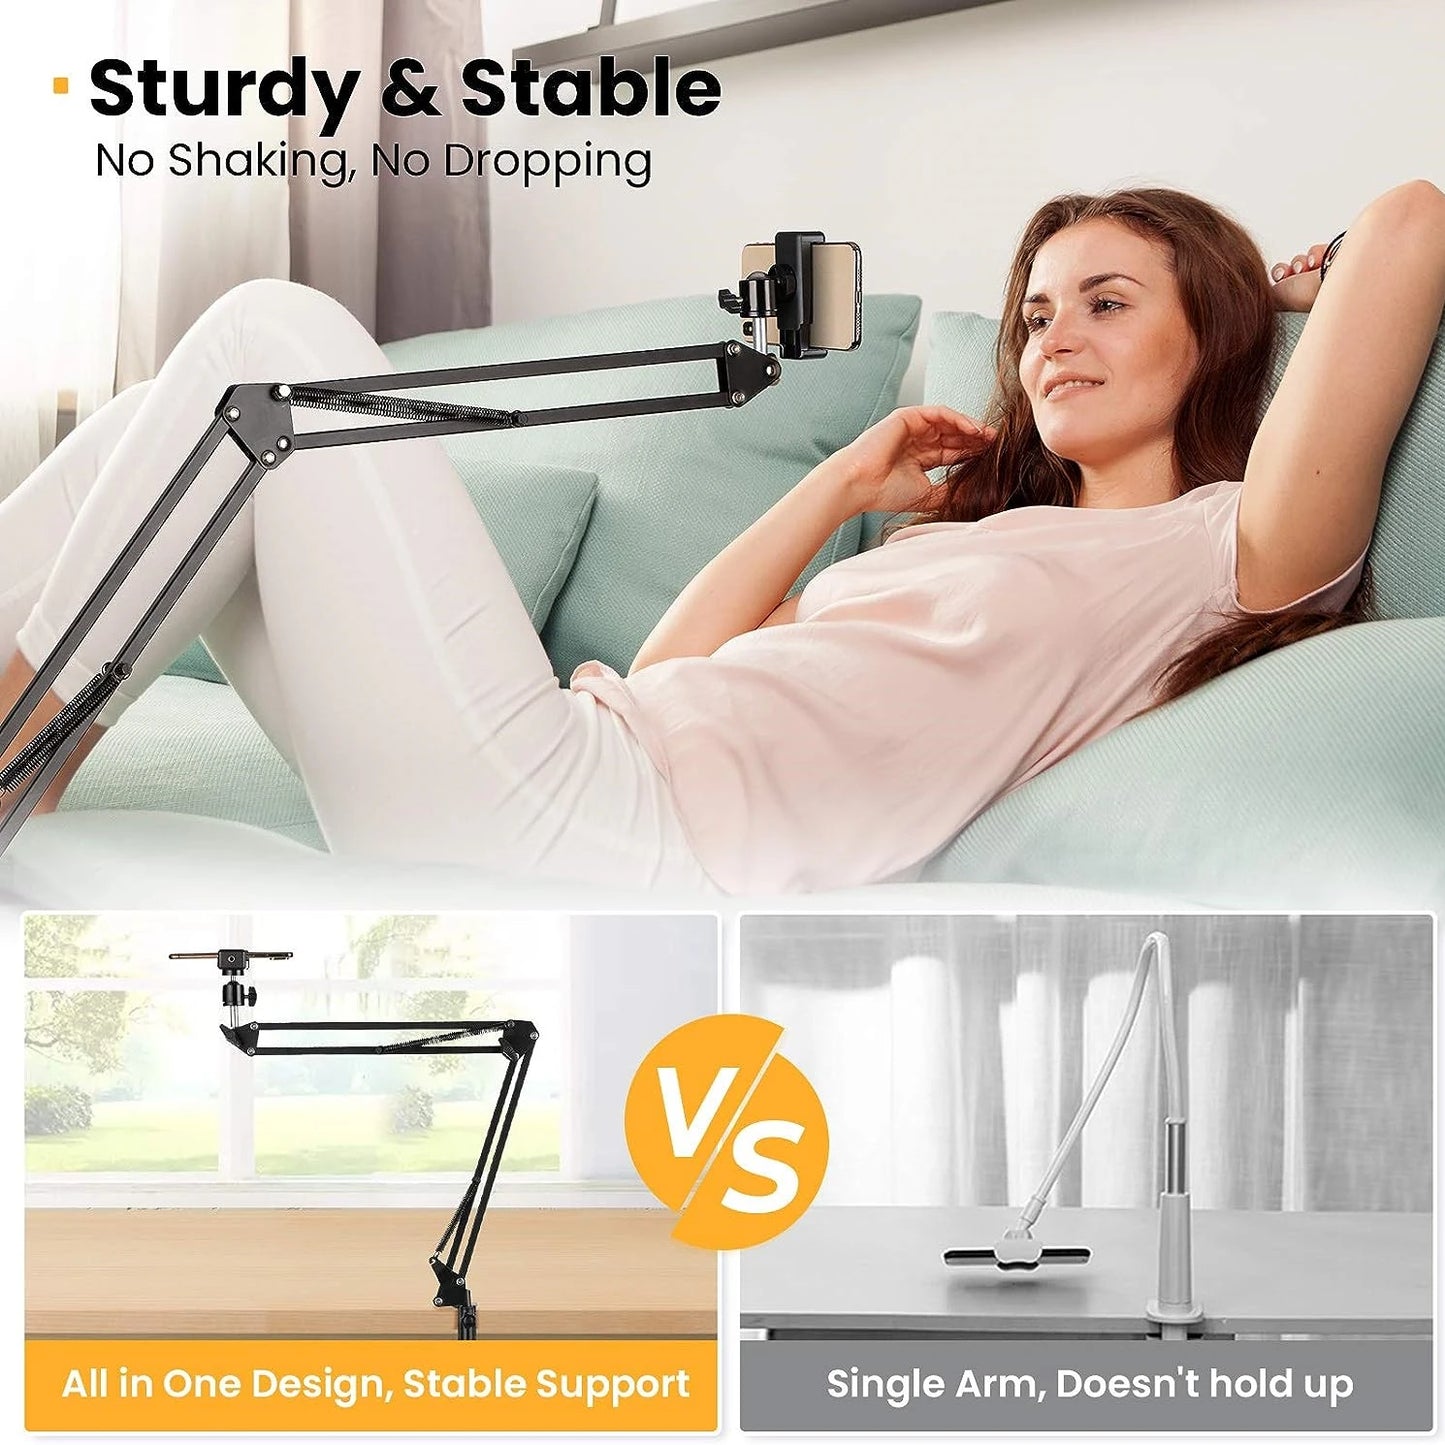 Flexible Arm Tripod Stand For Phone. Table Folded Anchor. 360° Rotation. Online Desktop Laptop Video Live Overhead Shot Photography.